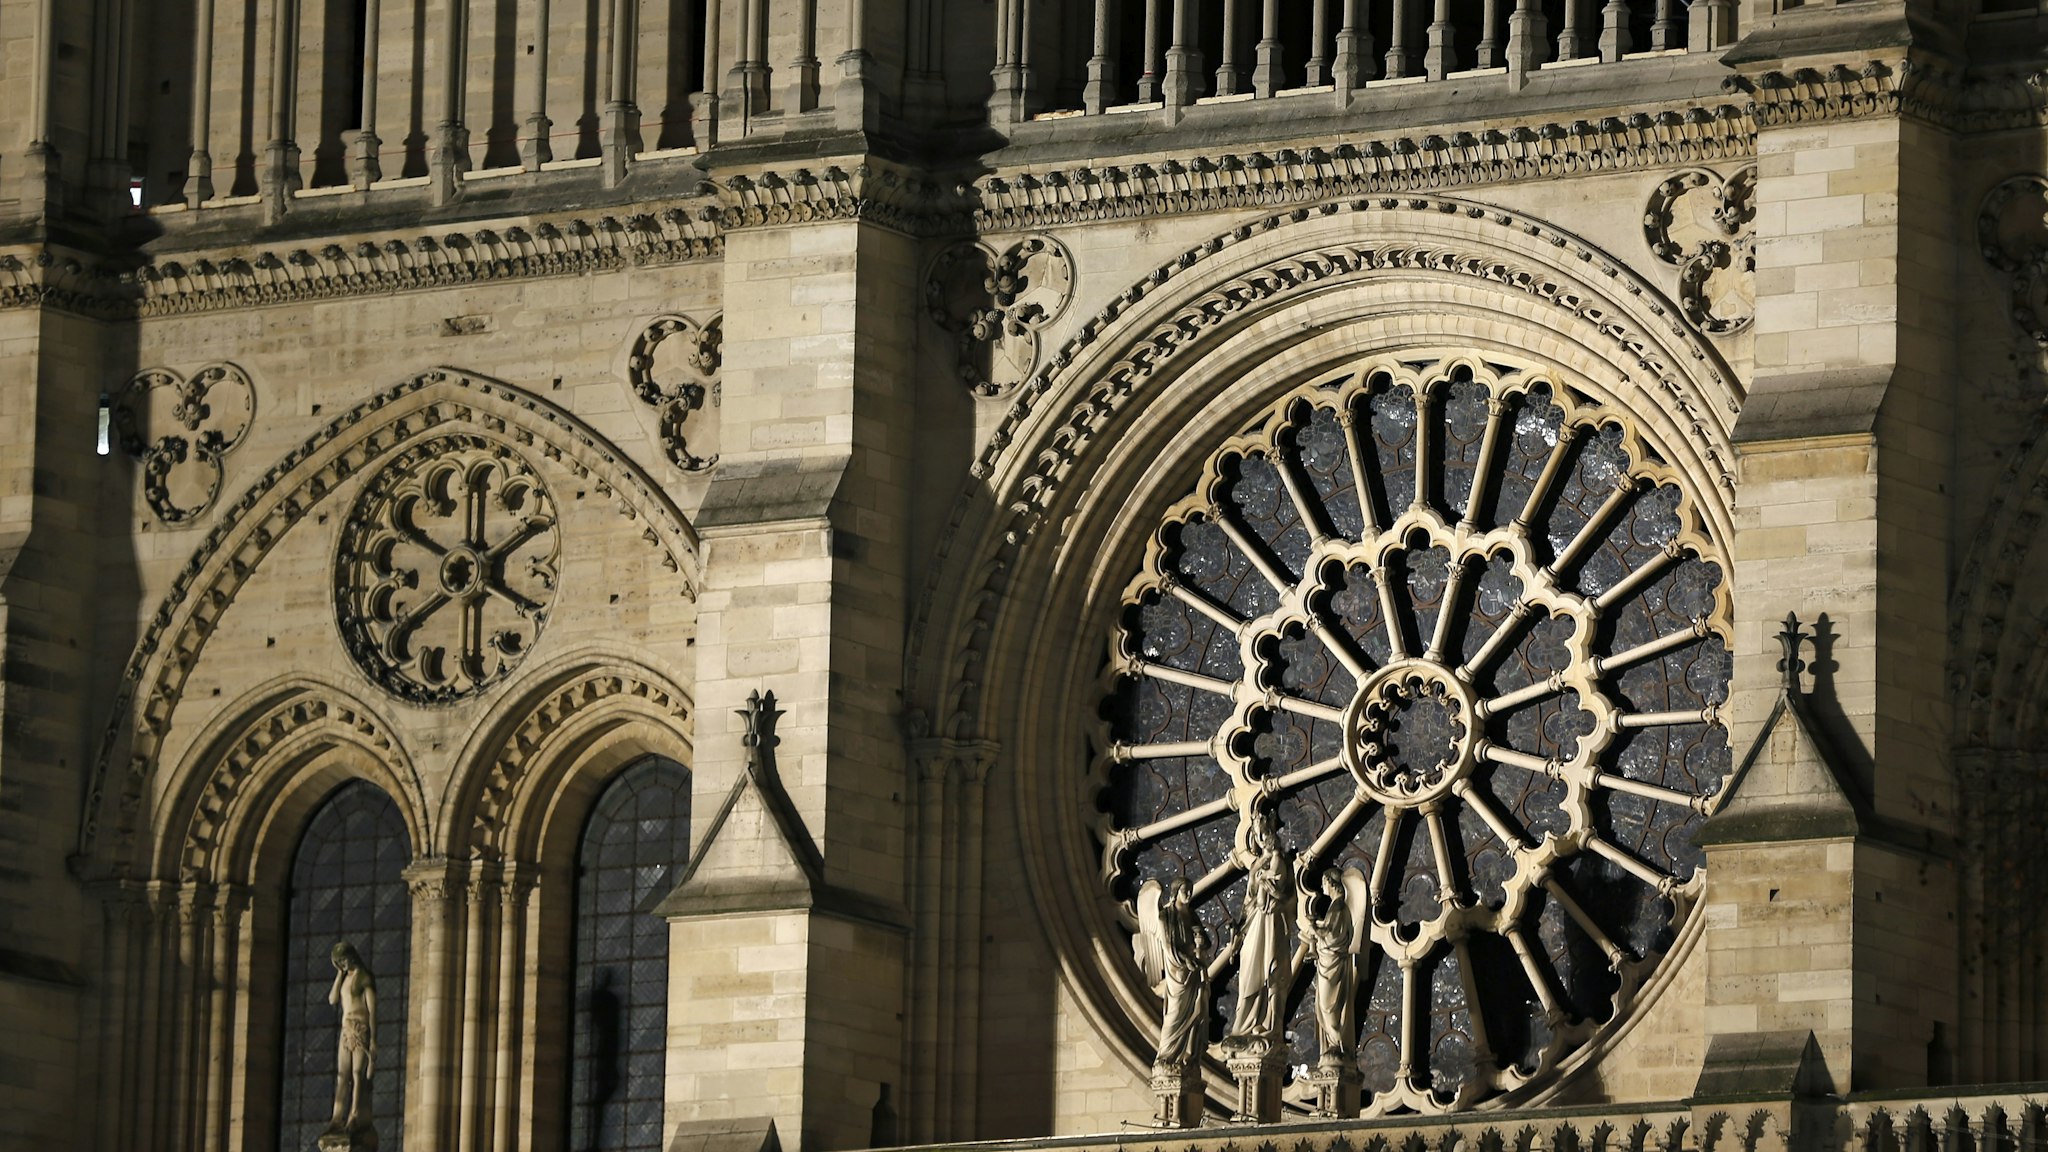 PARIS, FRANCE - DECEMBER 17: The facade of Notre-Dame cathedral is again illuminated at night more than eight months after the fire that ravaged the emblematic monument on December 17, 2019 in Paris, France. A fire broke out in Notre- Dame Cathedral in the evening of Monday, April 15, and quickly spread to the building's wooden roof destroying the famous spire. The cleaning and consolidation phase of the building should continue until the end of the year. (Photo by Chesnot/Getty Images)PARIS, FRANCE - DECEMBER 17: The facade of Notre-Dame cathedral is again illuminated at night more than eight months after the fire that ravaged the emblematic monument on December 17, 2019 in Paris, France. A fire broke out in Notre- Dame Cathedral in the evening of Monday, April 15, and quickly spread to the building's wooden roof destroying the famous spire. The cleaning and consolidation phase of the building should continue until the end of the year. (Photo by Chesnot/Getty Images)